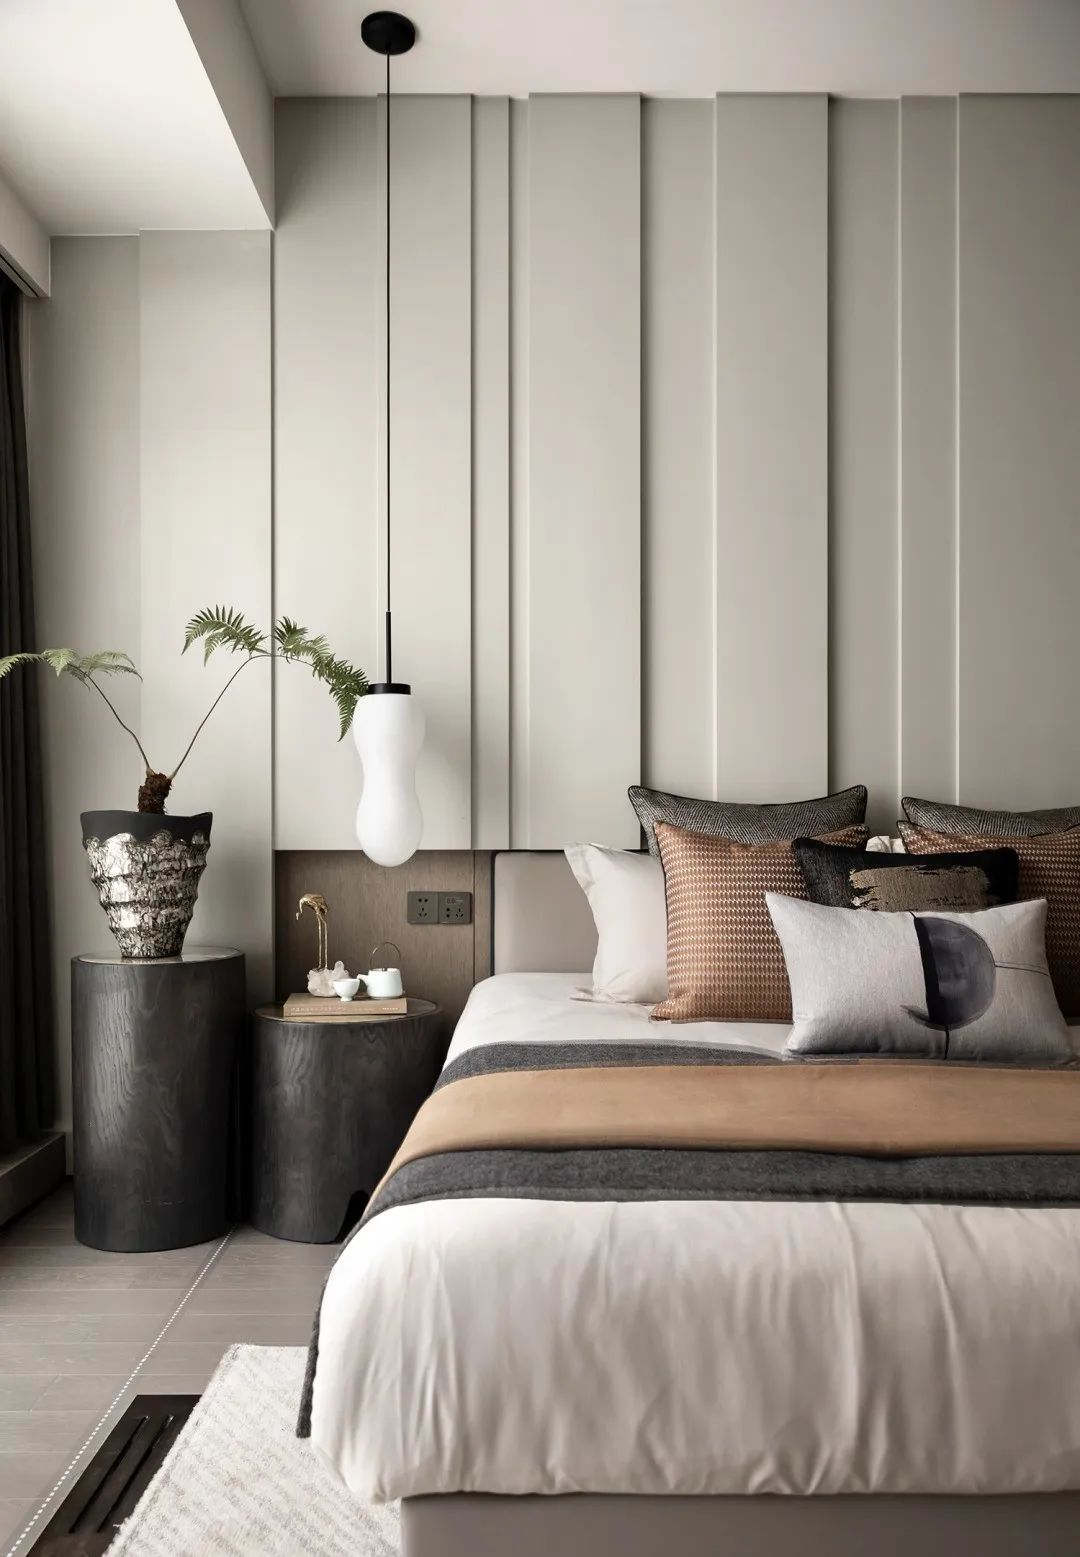 Black And White Theme for Bedrooms